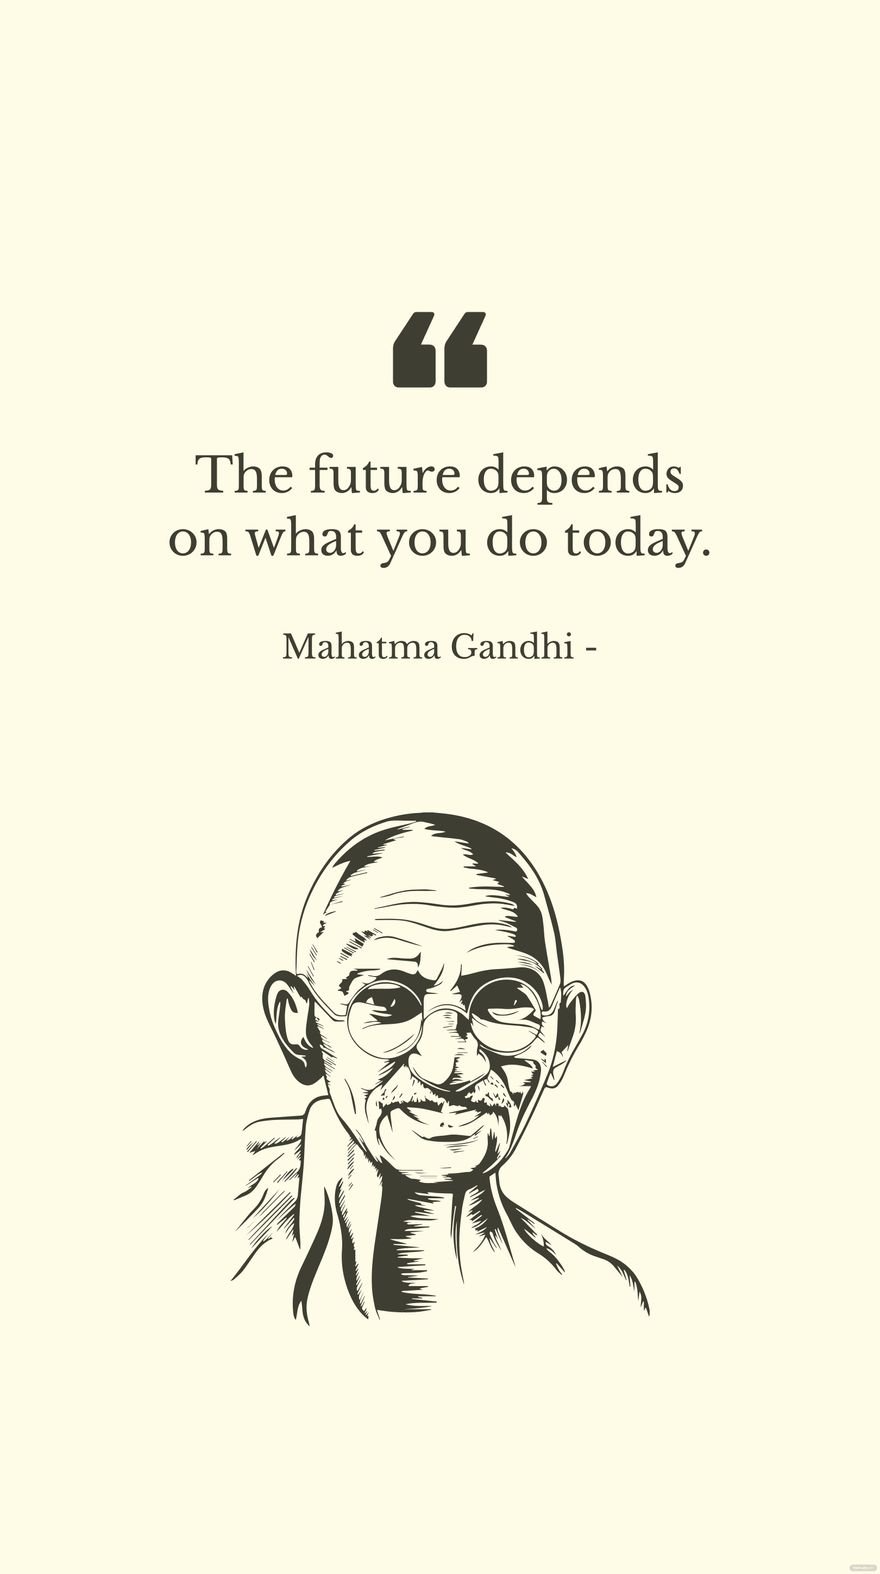 Mahatma Gandhi - The future depends on what you do today. in JPG